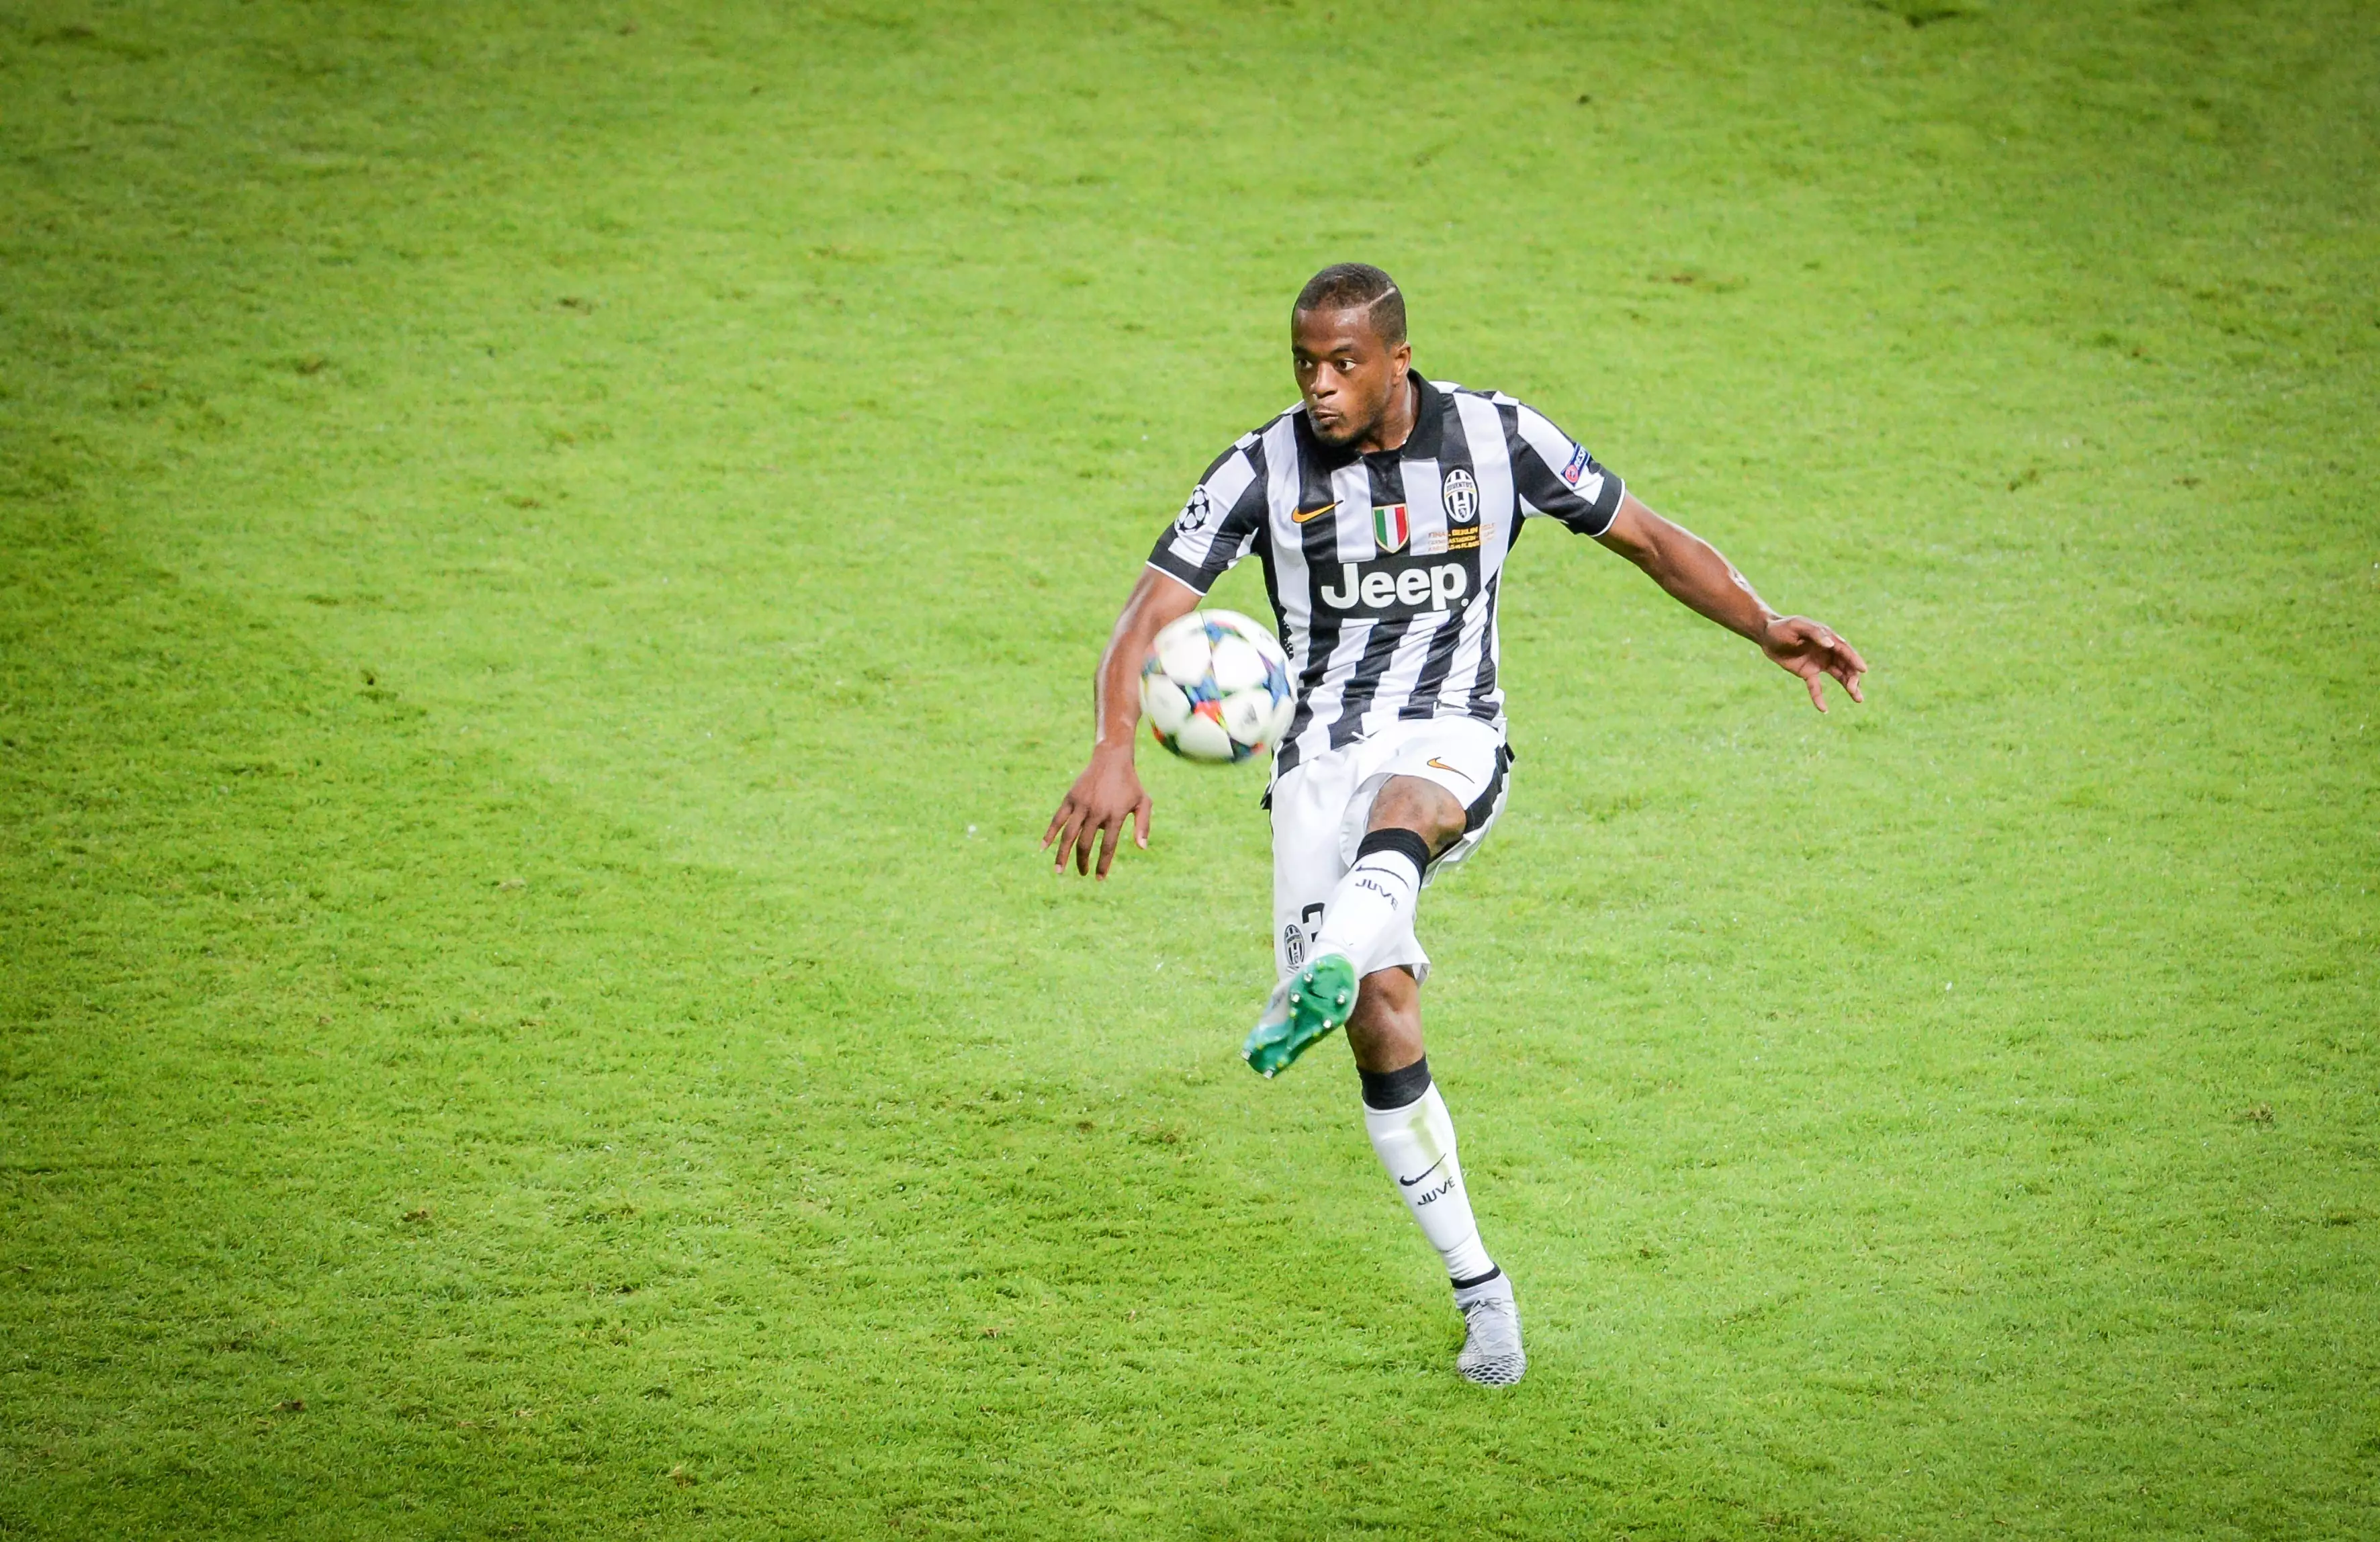 Evra reached a Champions League final with Juventus. Image: PA Images